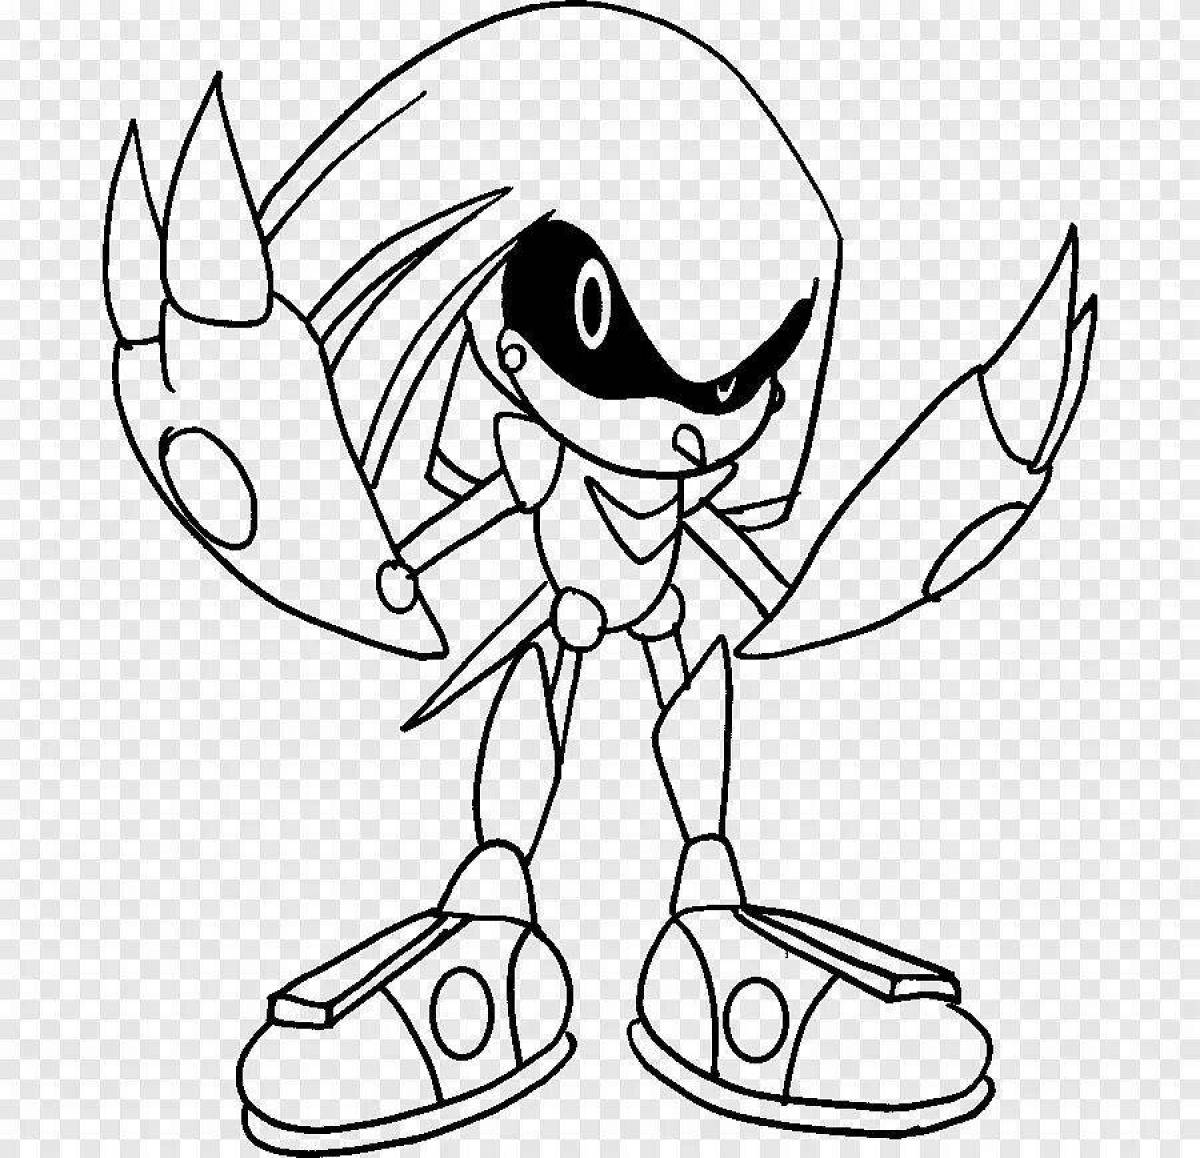 Sonic knuckles dazzling coloring book